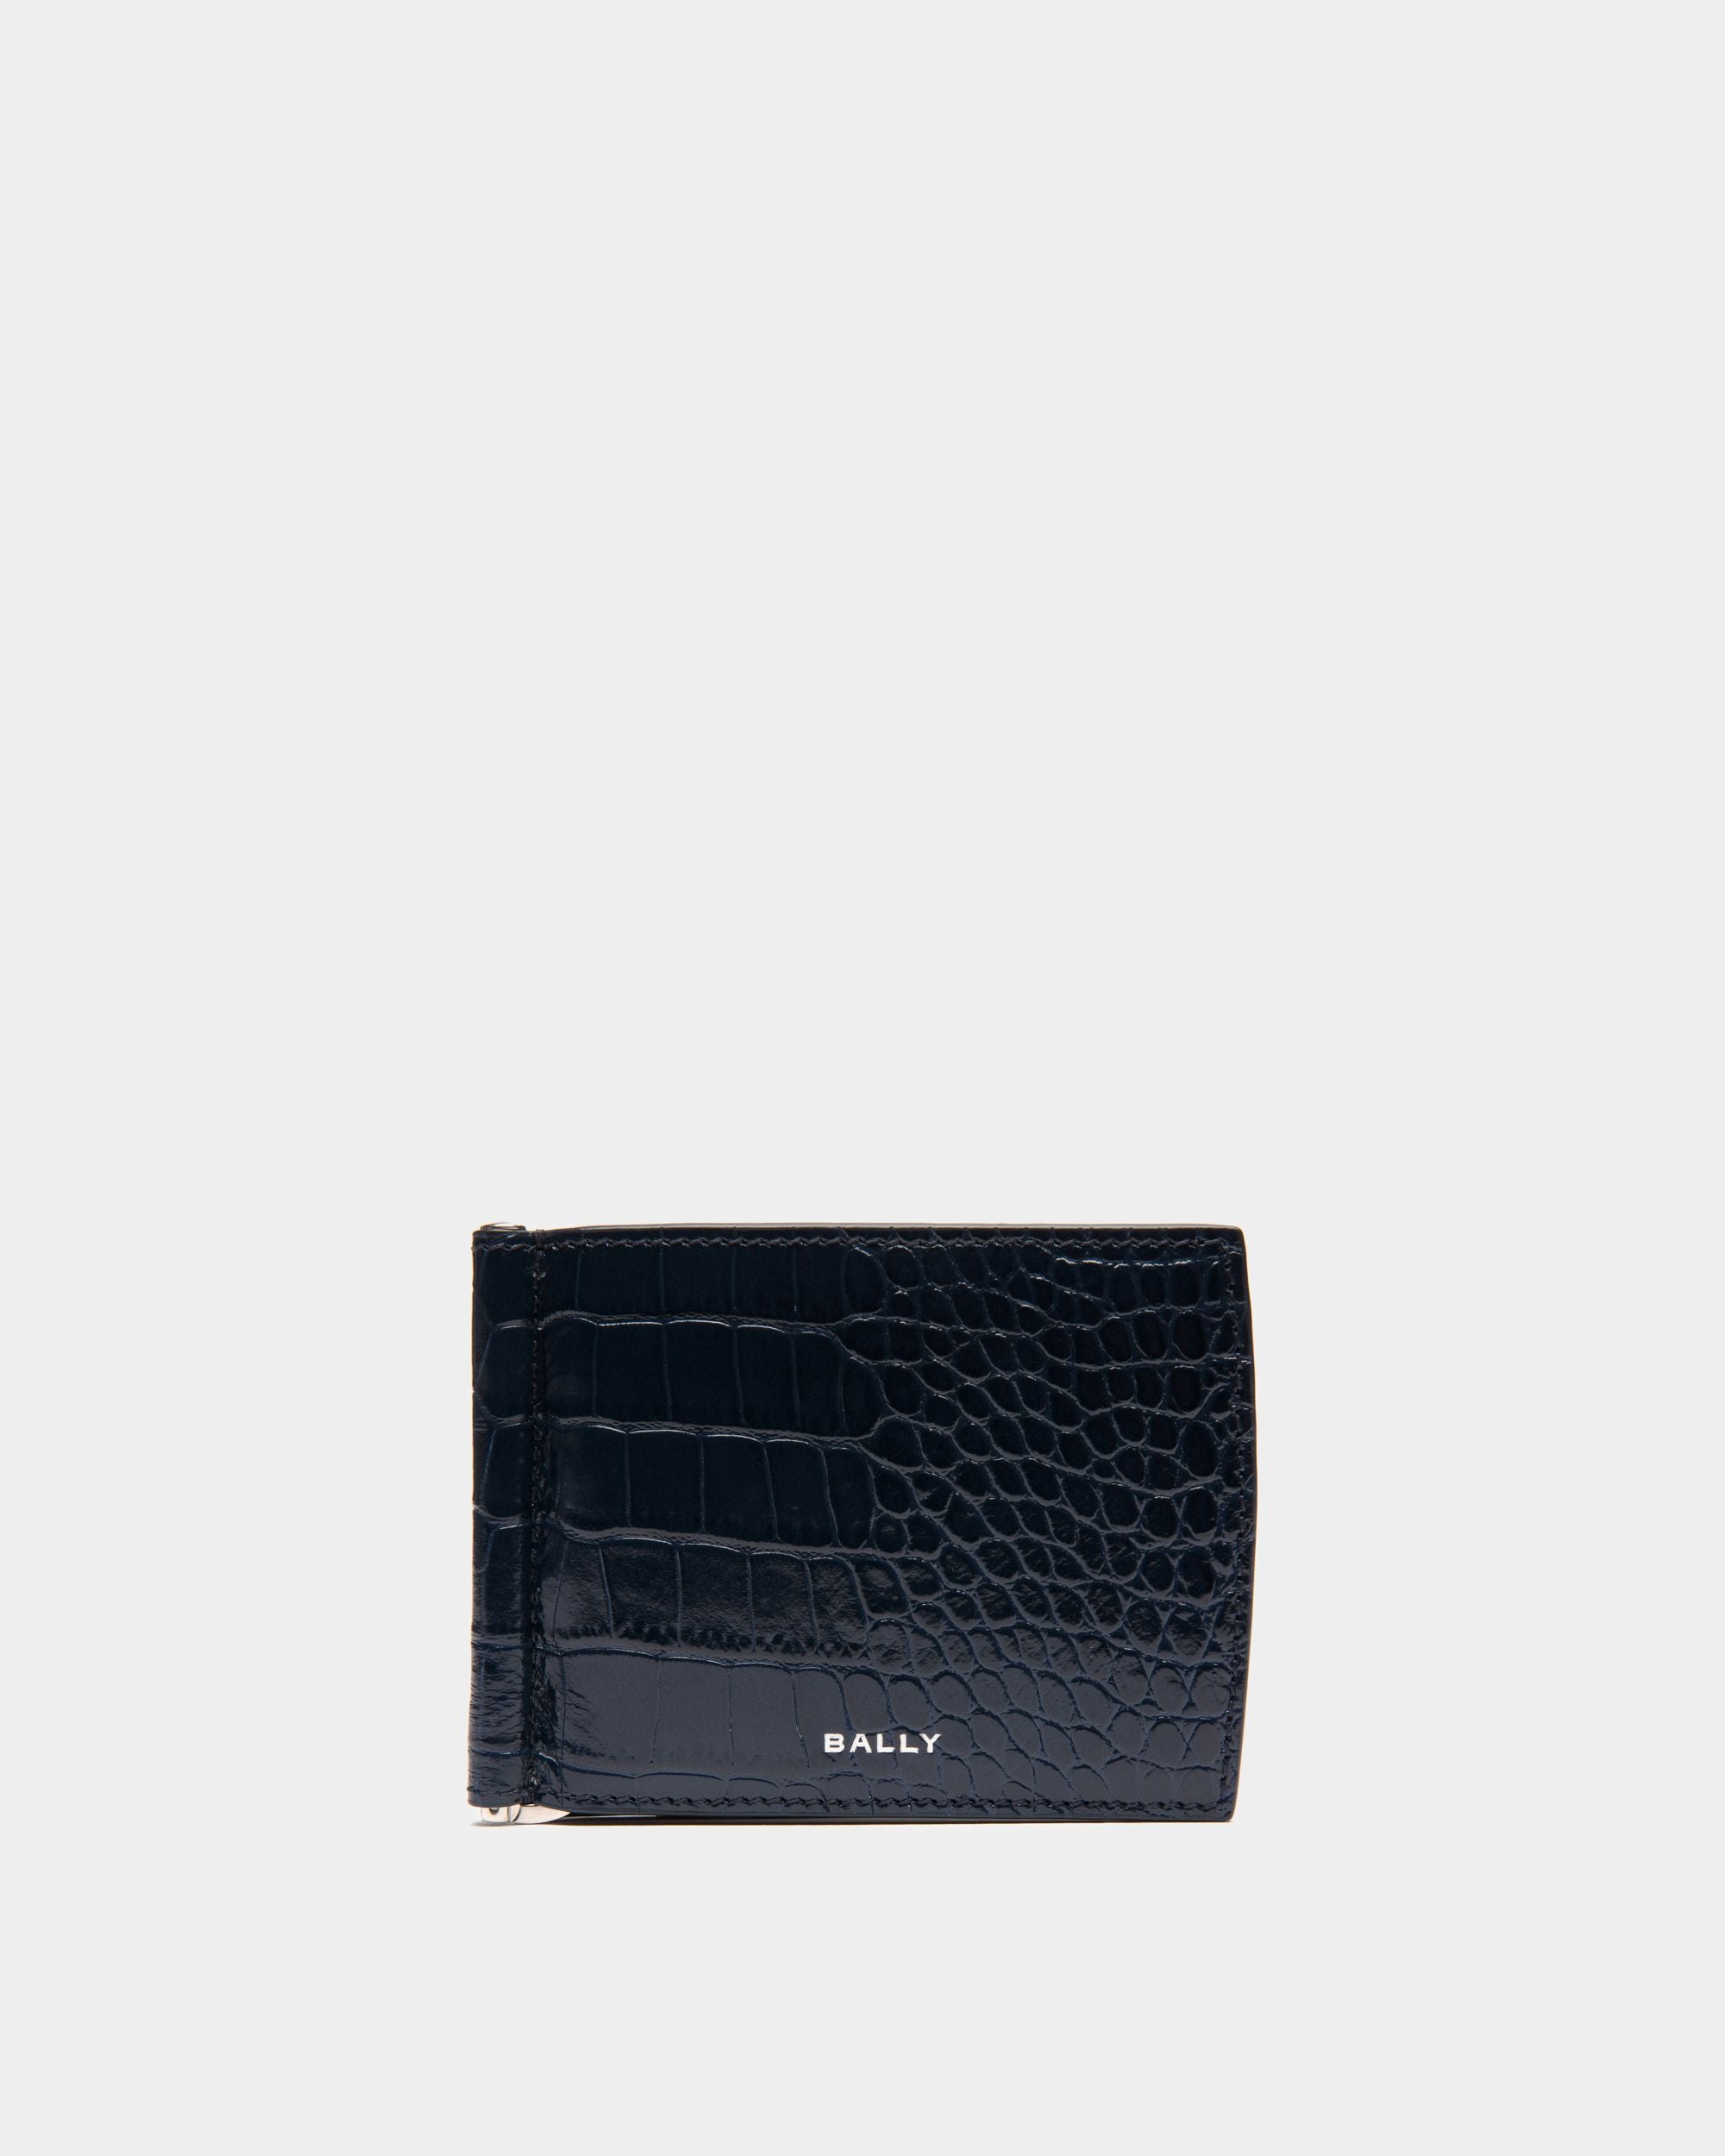 Busy Bally | Men's Bifold Wallet in Blue Crocodile Print Leather | Bally | Still Life Front